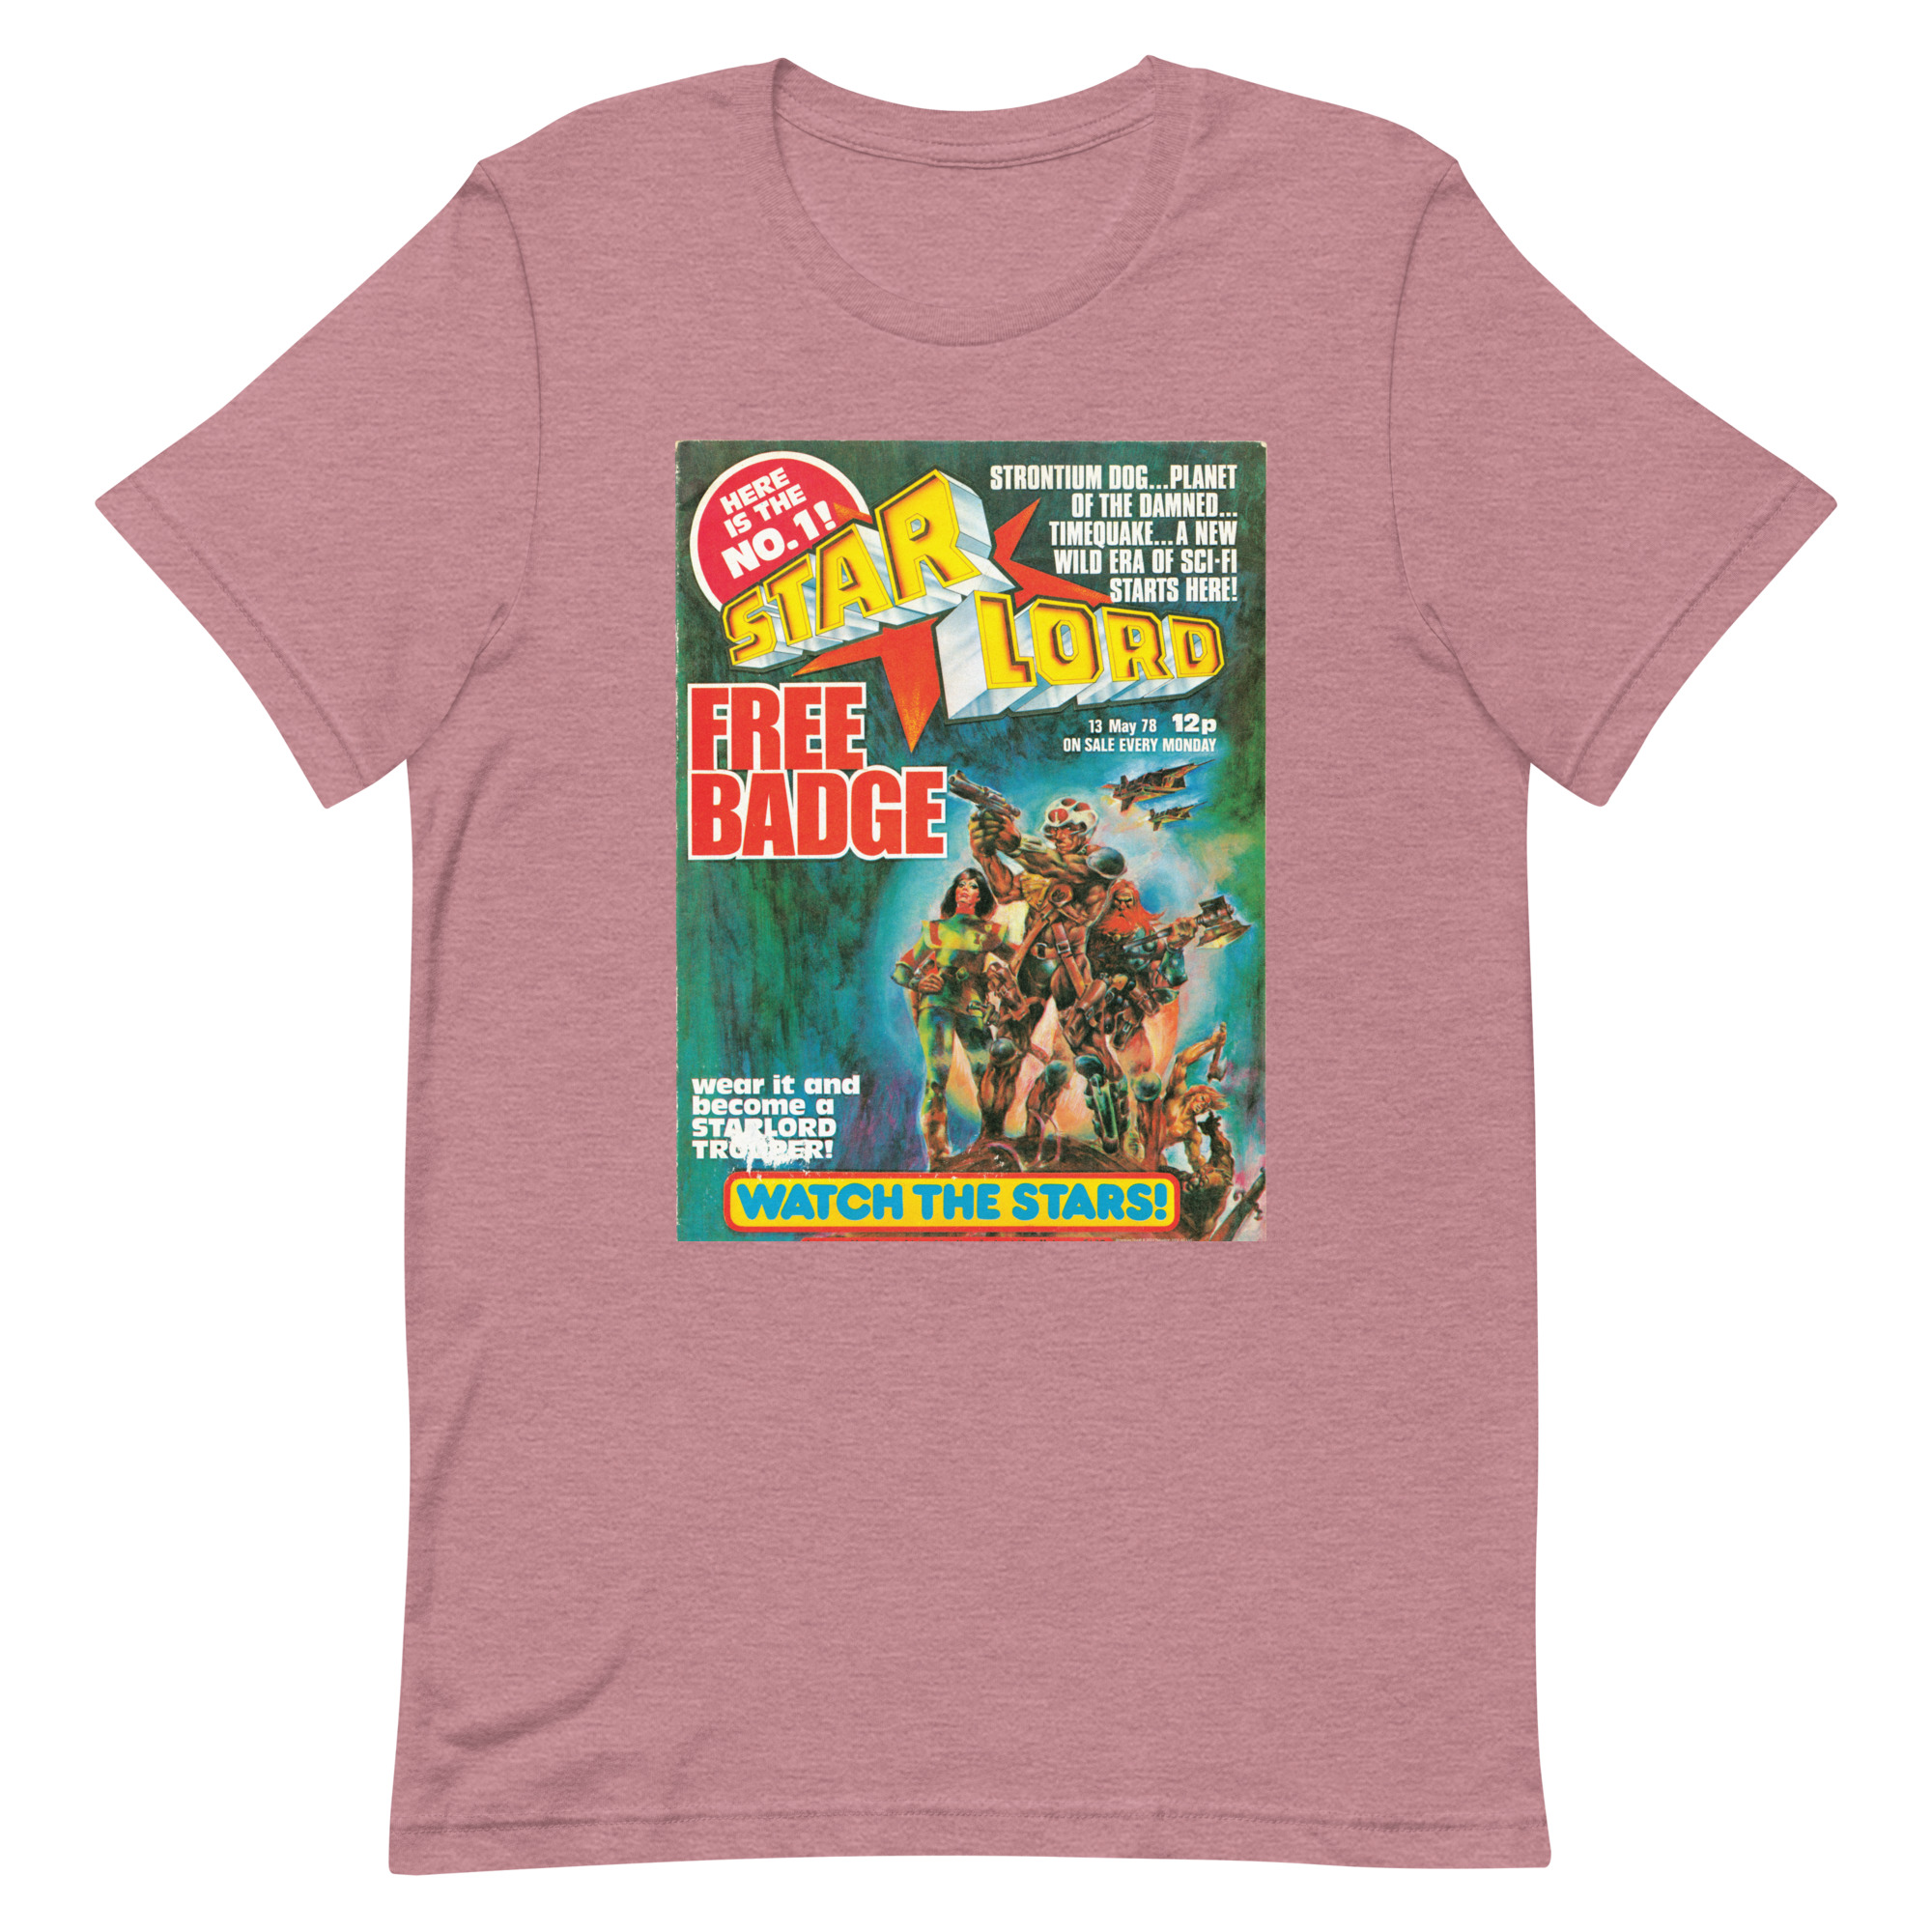 Starlord #1 T-Shirt (Heather Orchid)